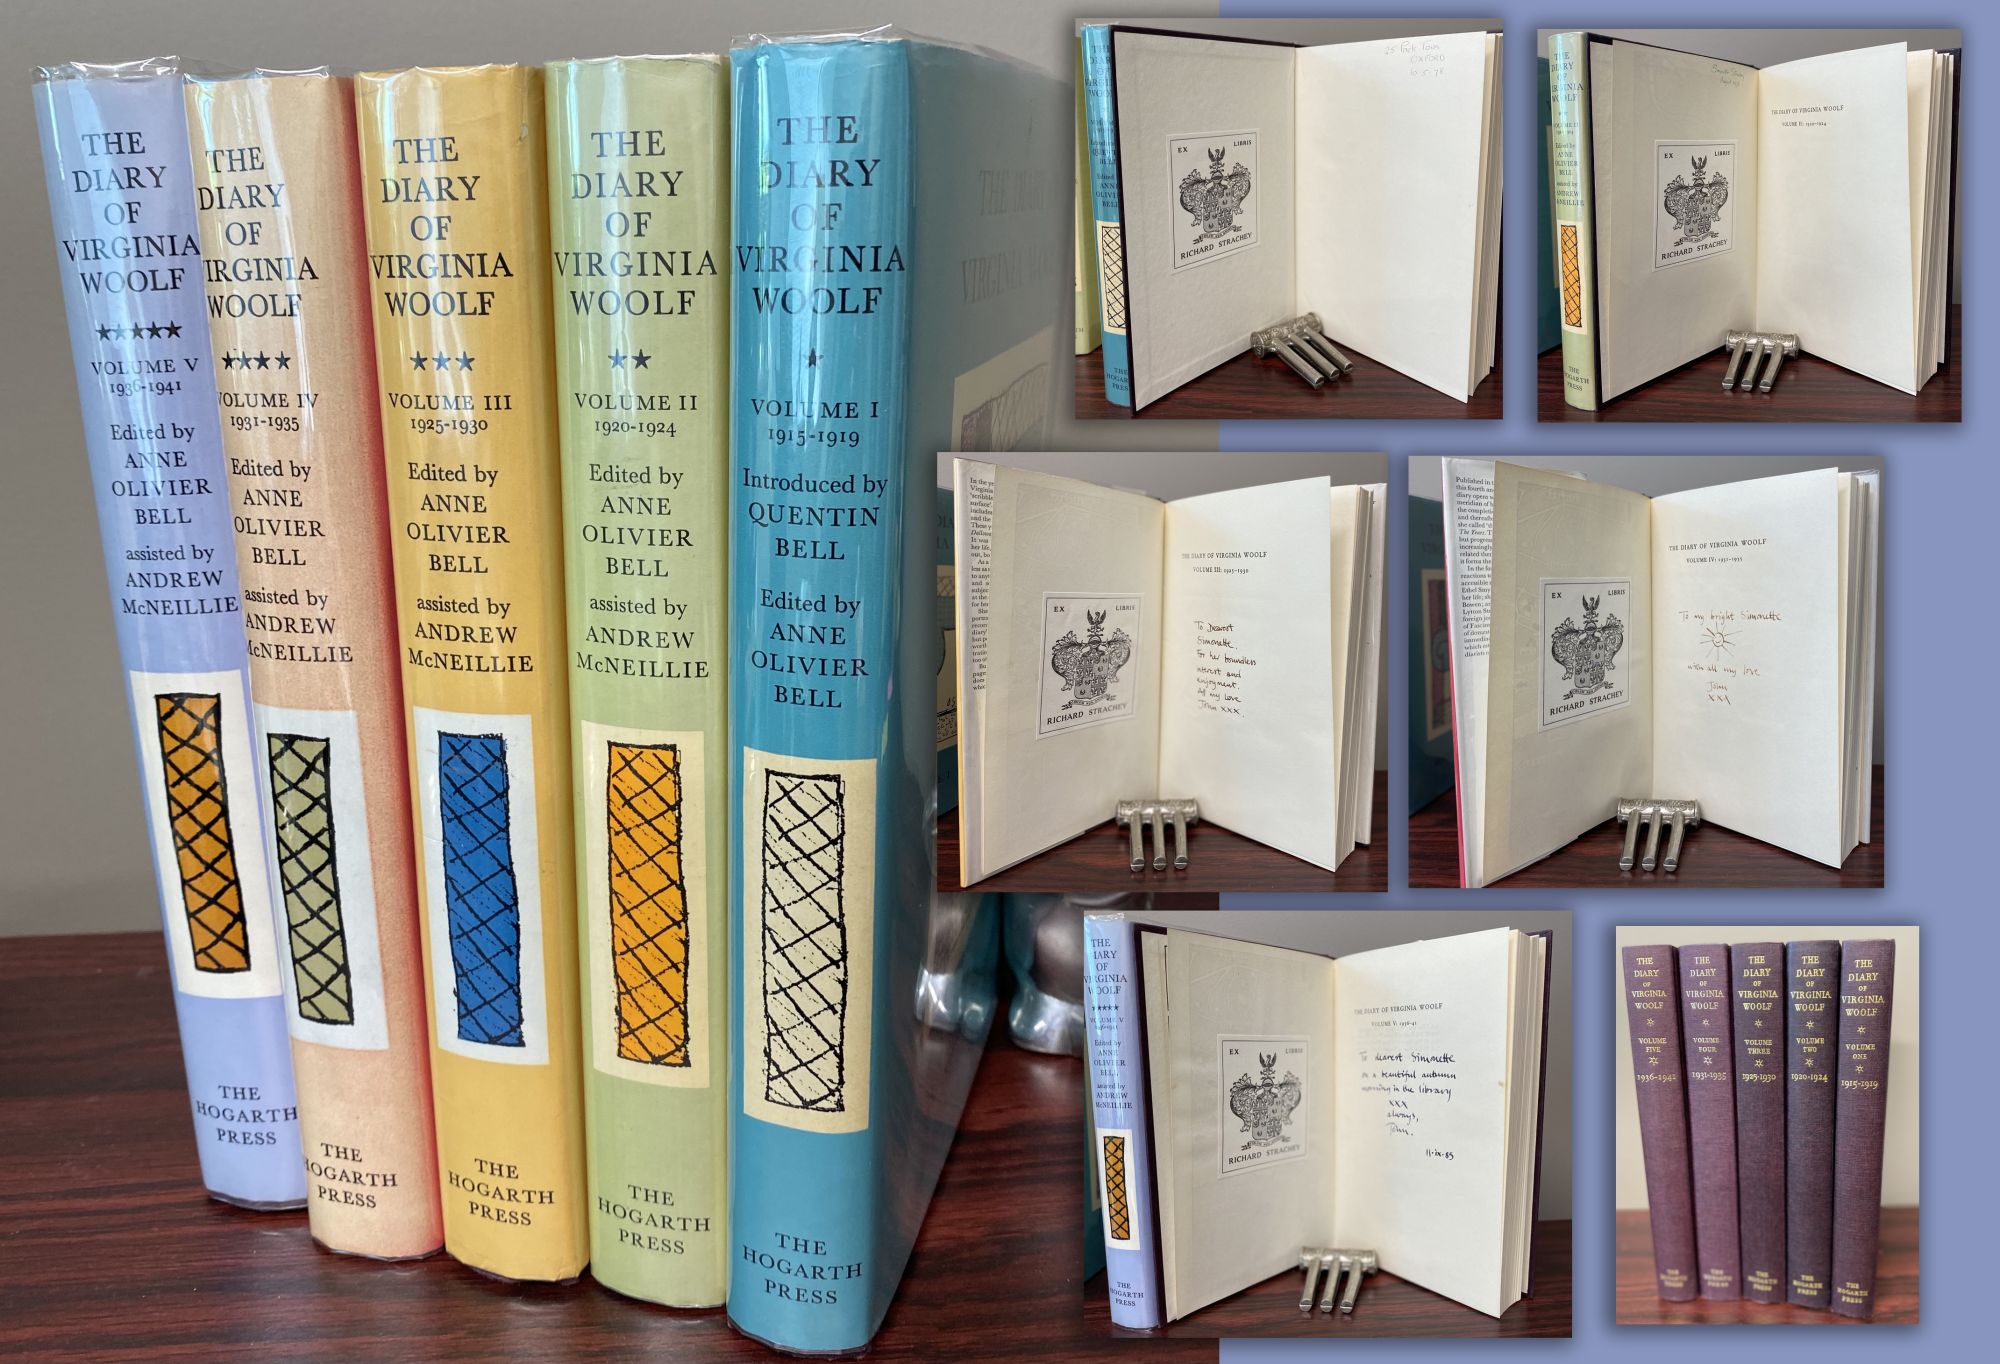 Woolf, Virginia. Bell, Anne Olivier. (edit.) - The Diary of Virginia Woolf. (Complete in Five Volumes). With the Ex Libris of Richard Strachey Inscribed by John Strachey in Volumes III. IV and V on the Title - Pages to Simonette with Her Name on Volume I and Signature on Volume II